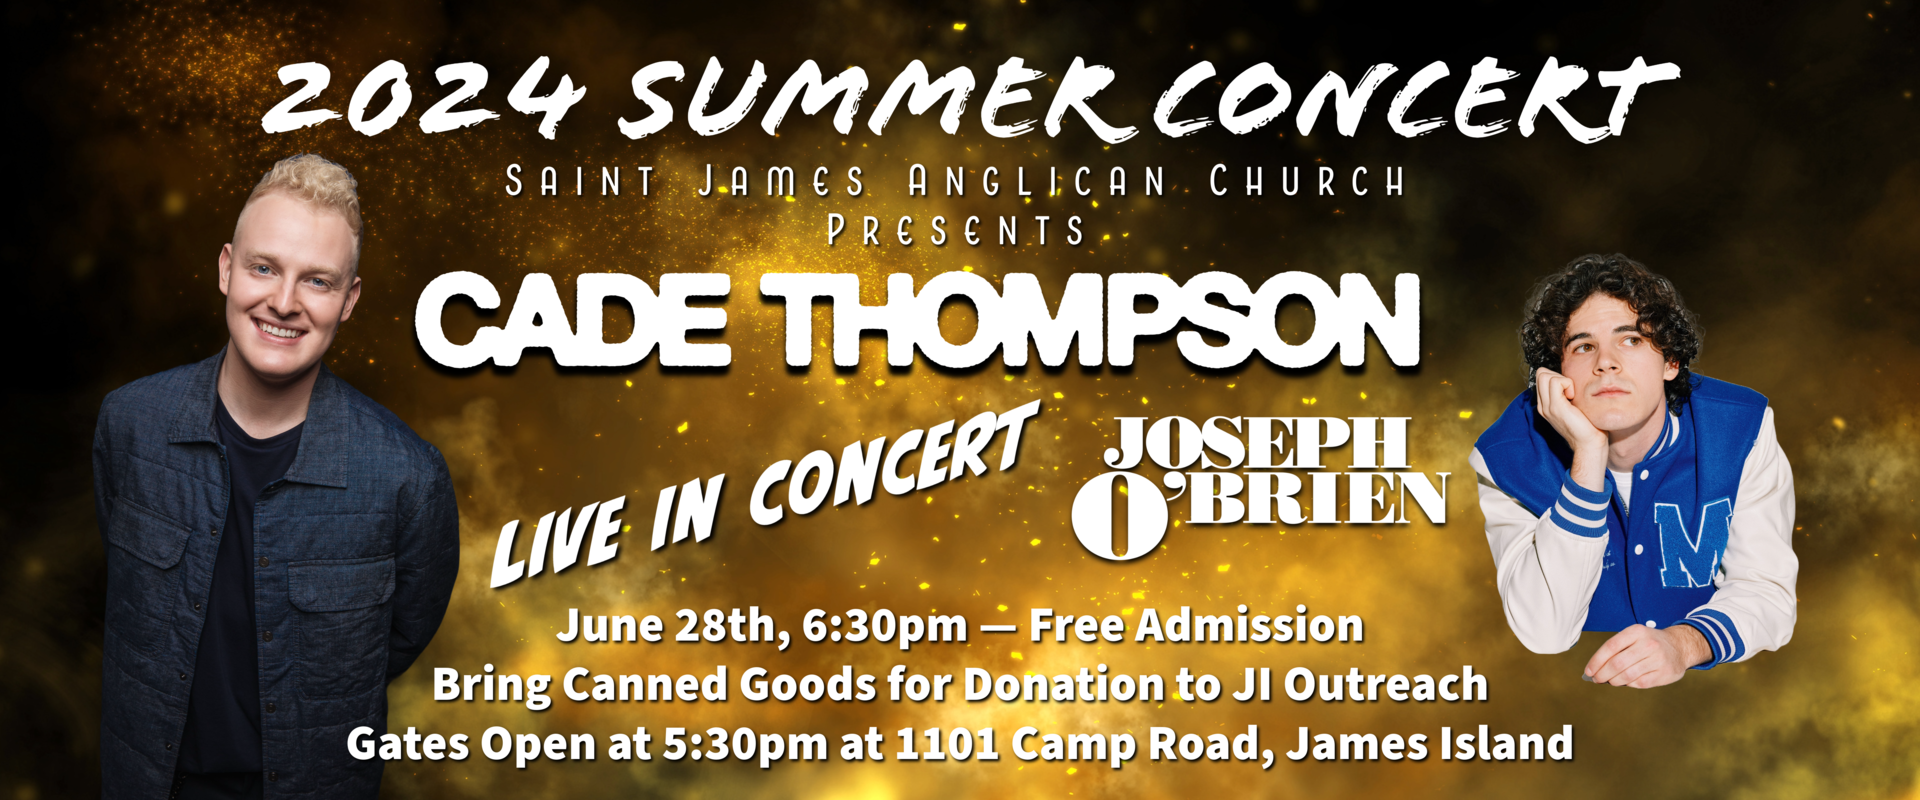 2024 Summer Concert with Cade Thompson and Joseph OBrien